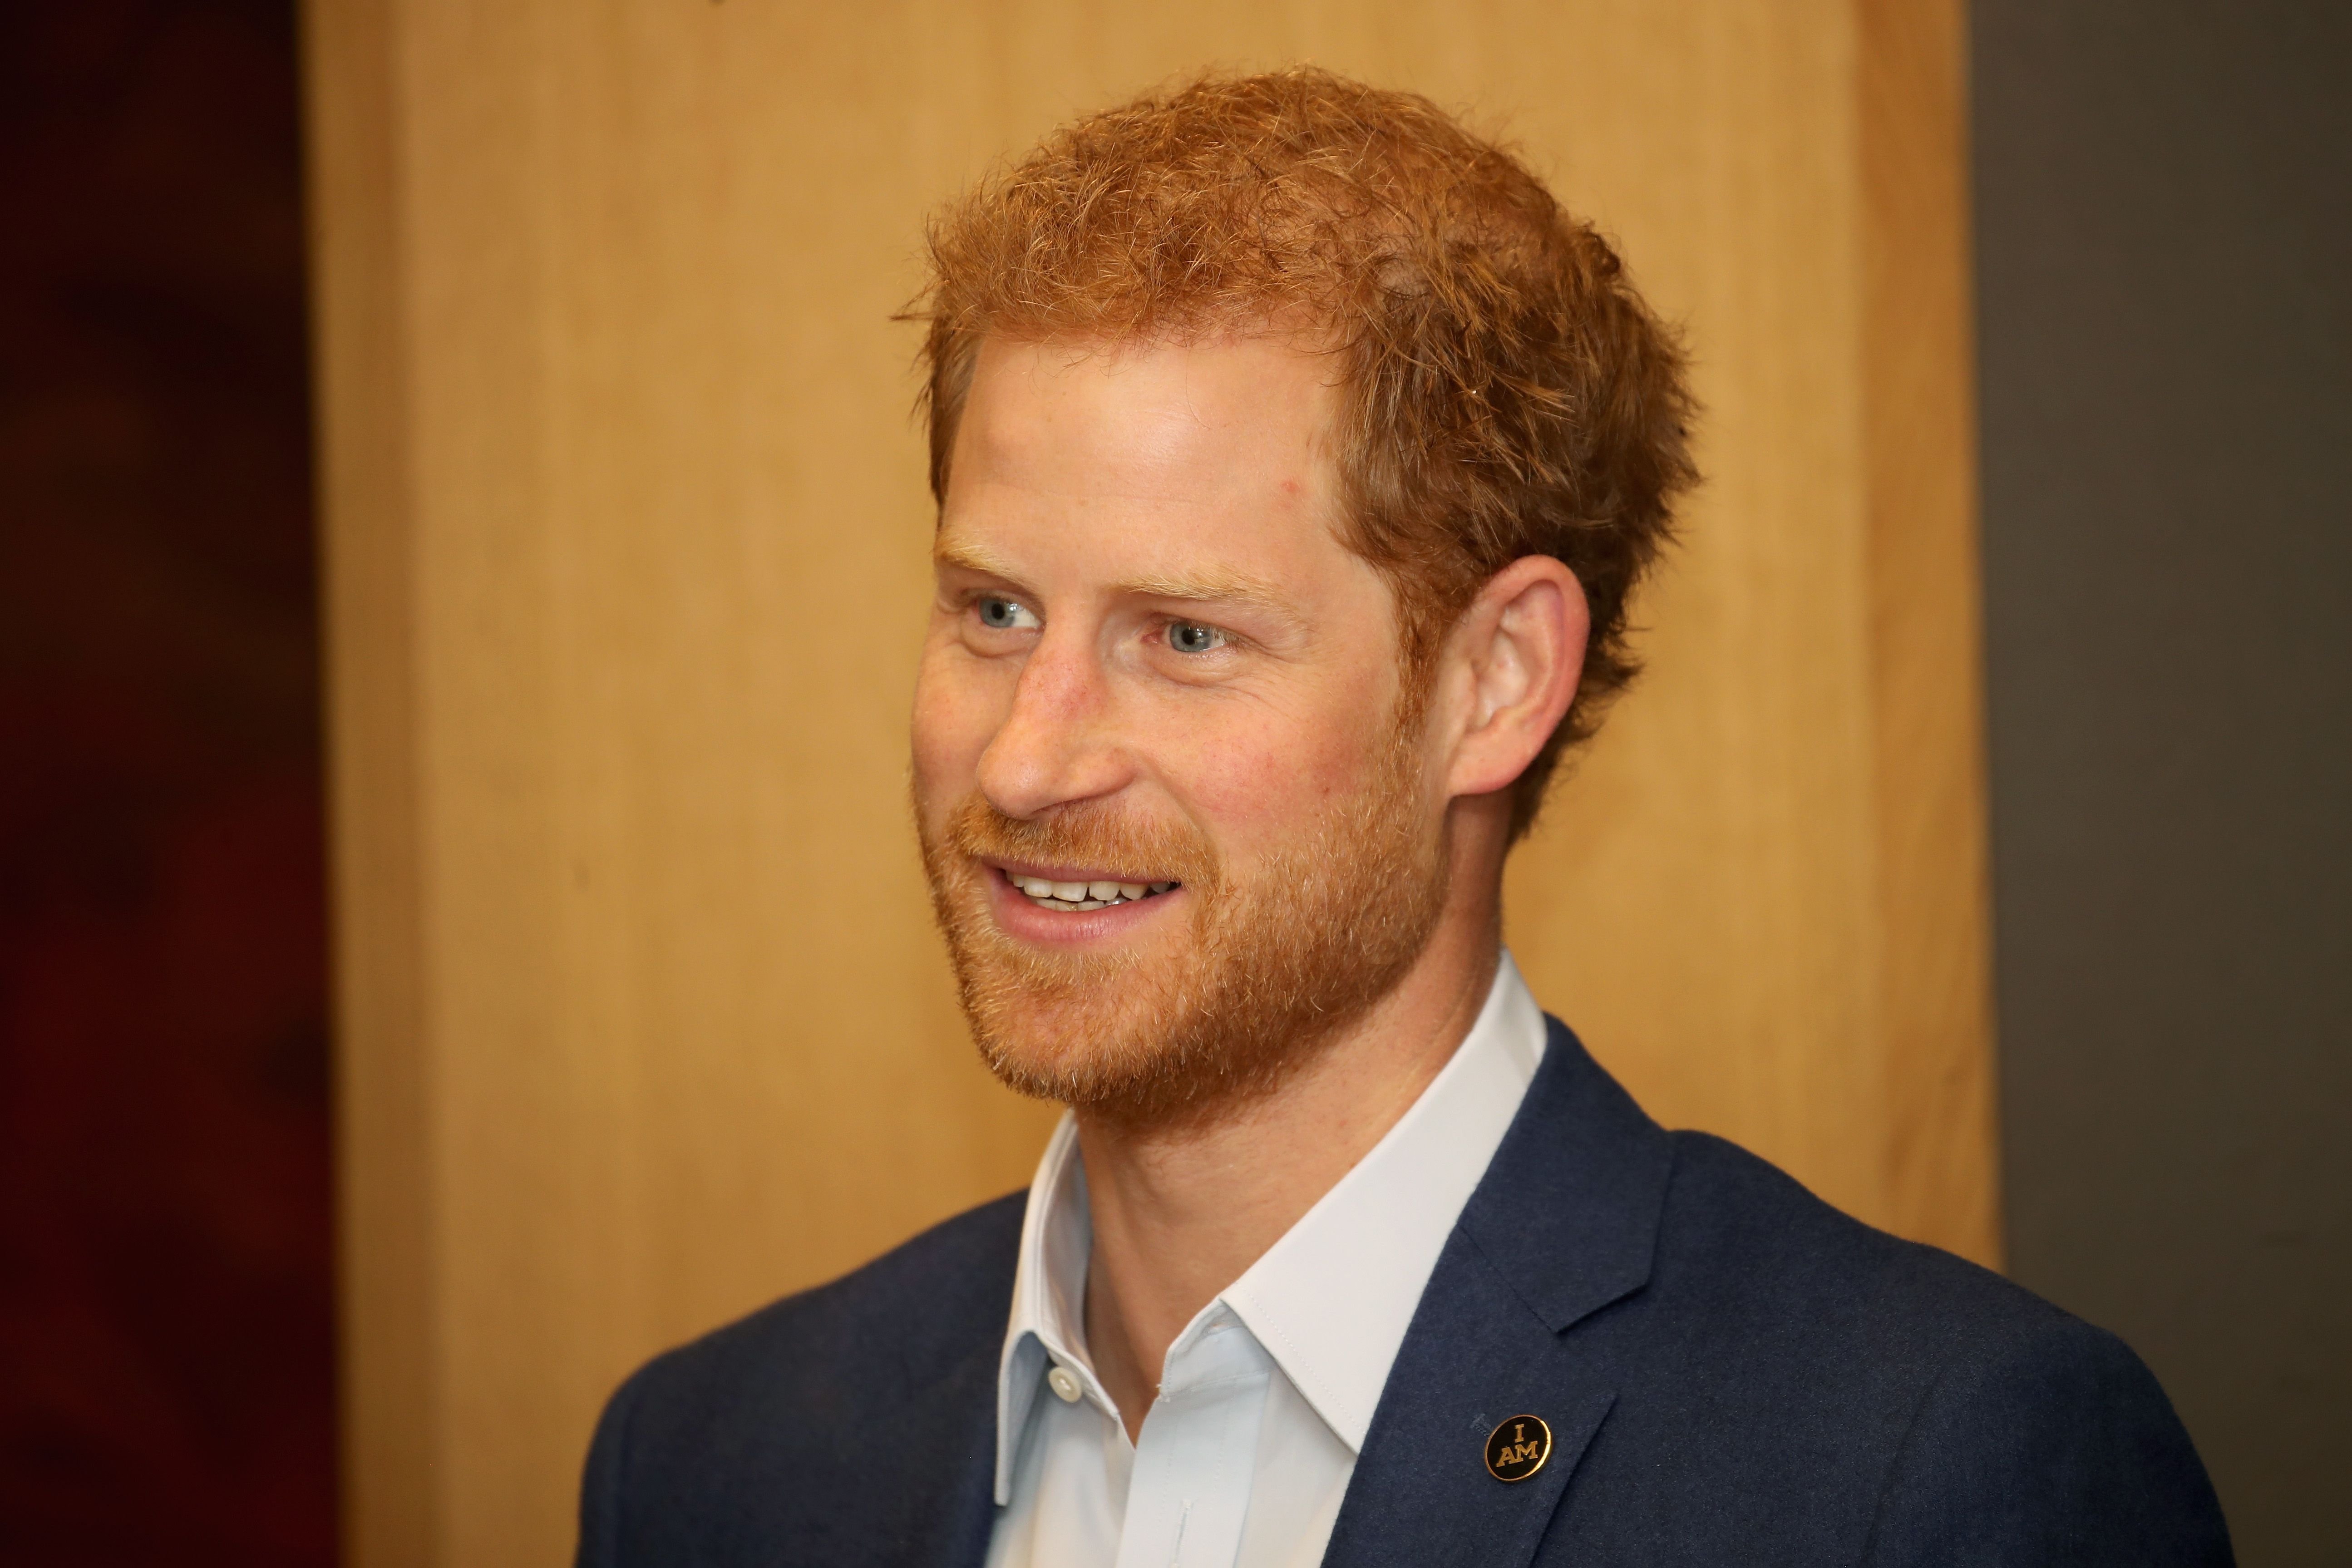 Prince Harry at the True Patriot Love Symposium at Scotia Plaza during a pre Invictus Games event on September 22, 2017 in Toronto, Canada | Photo: Getty Images